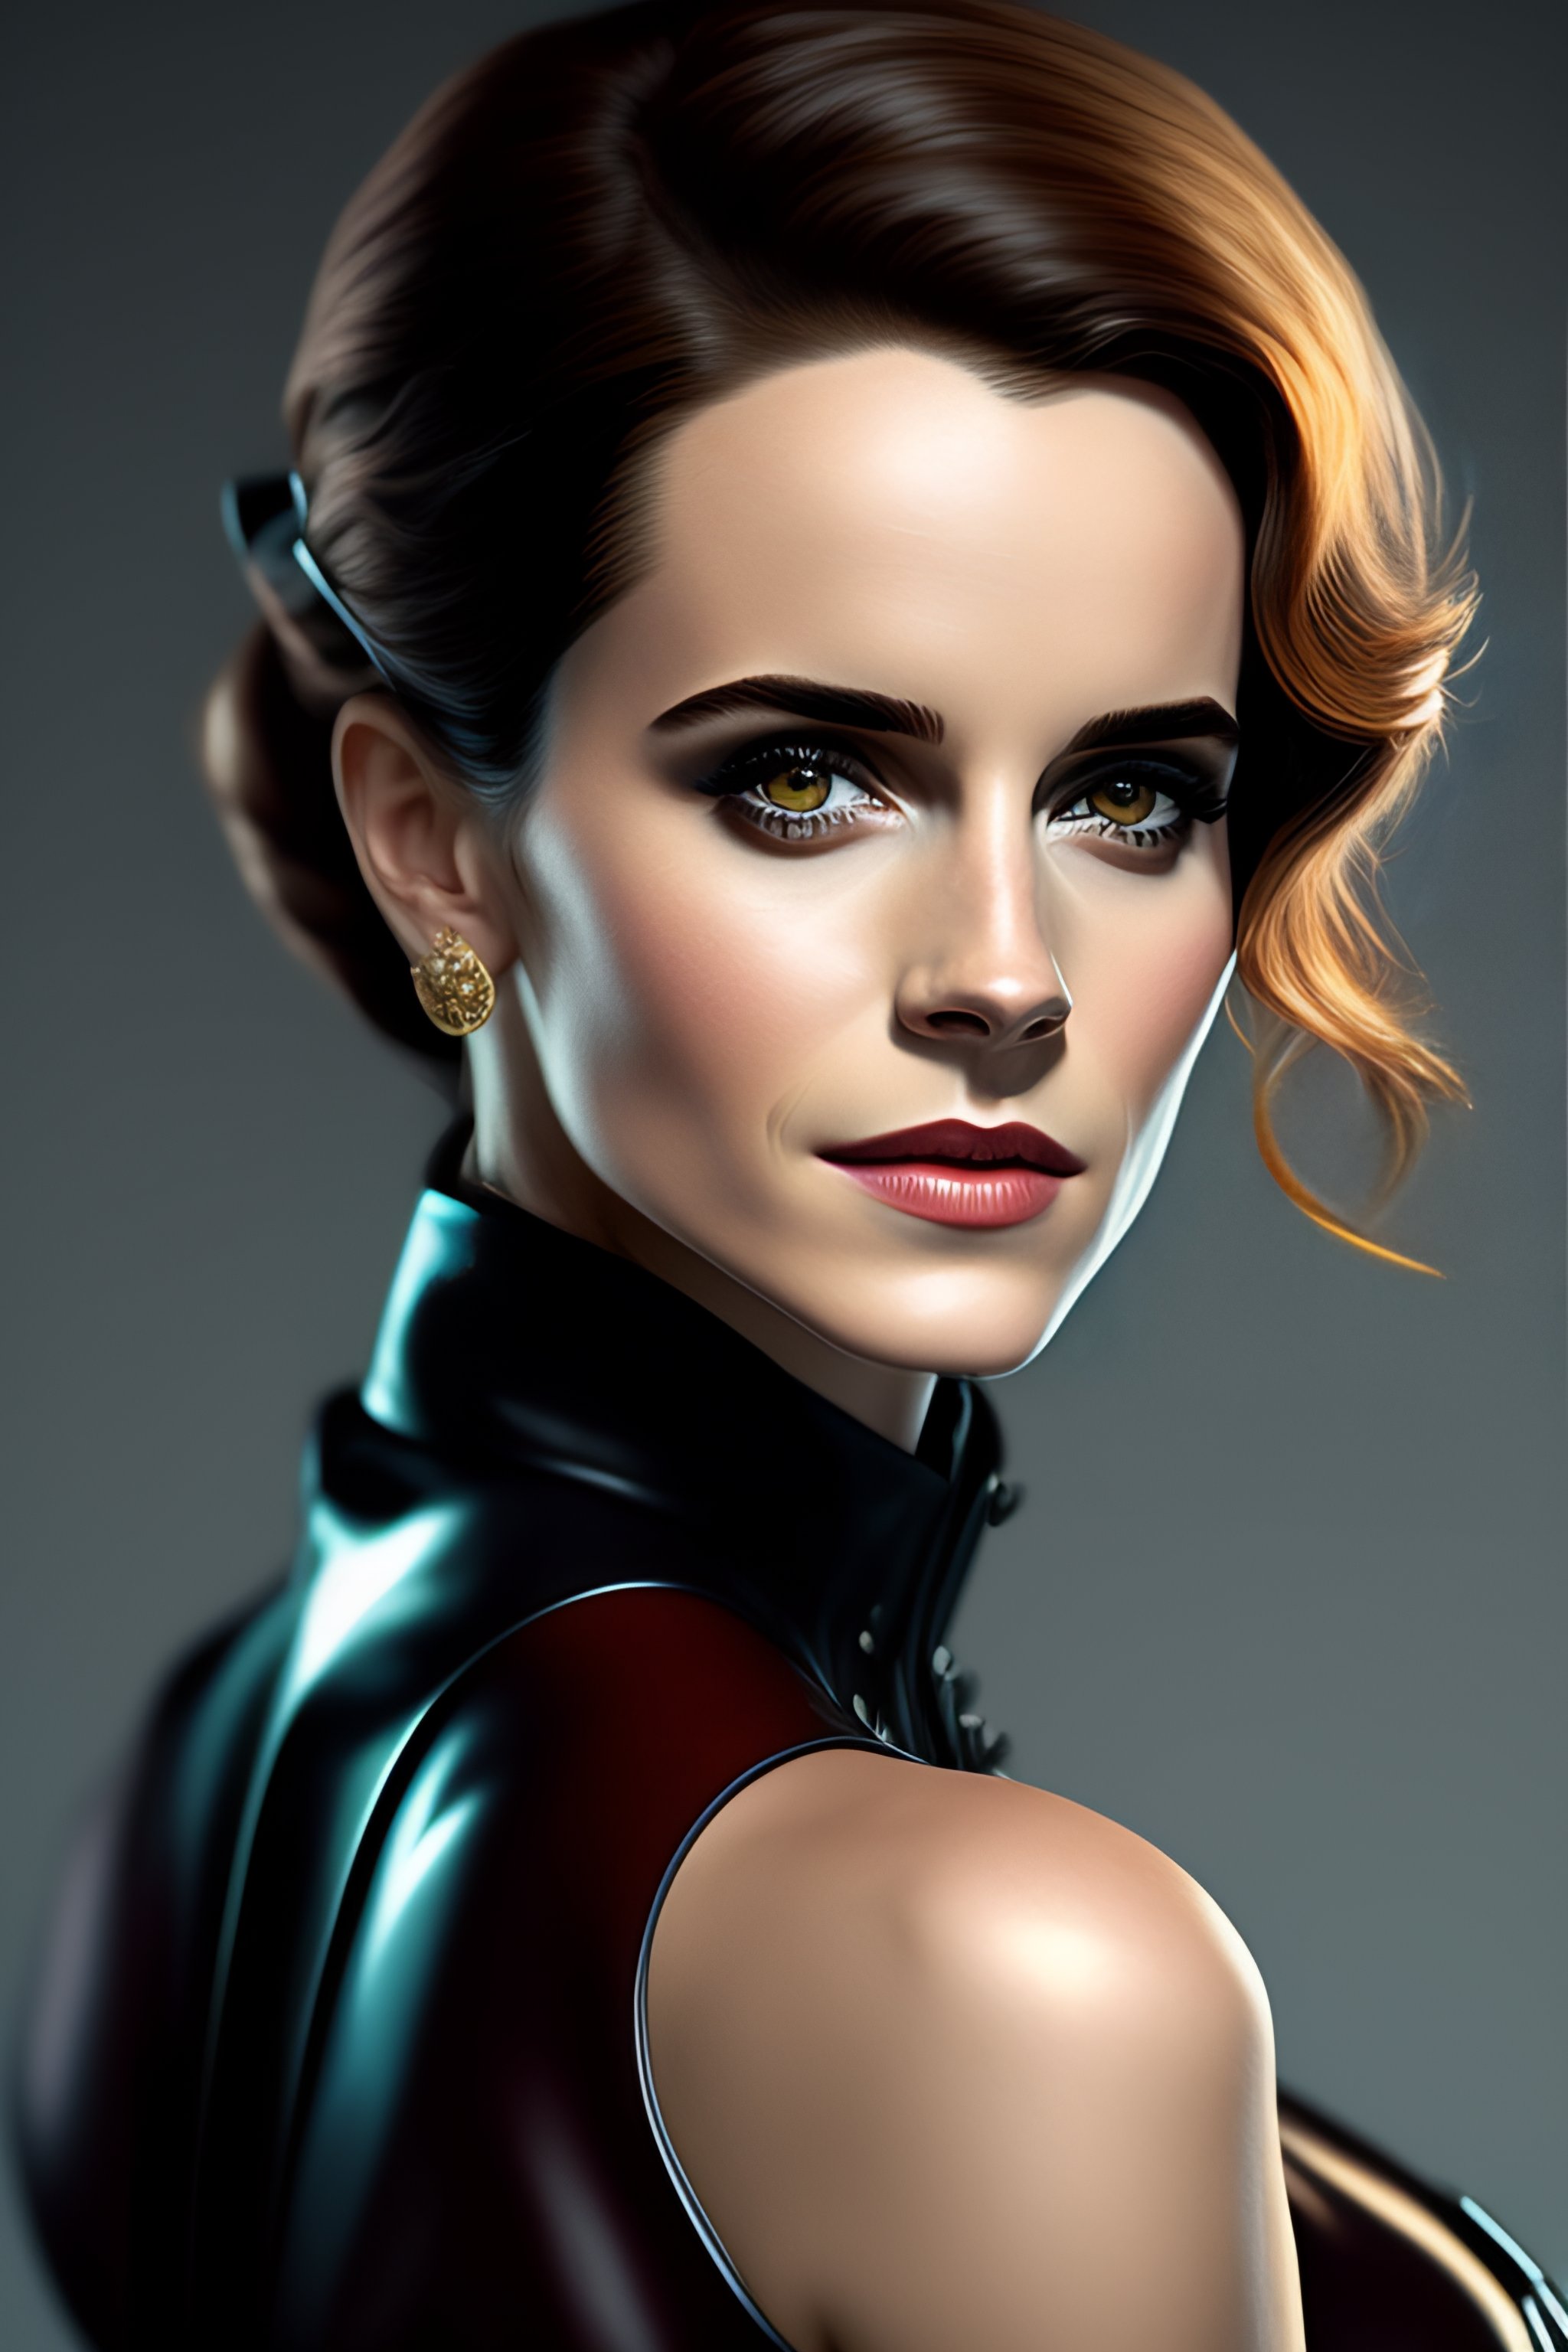 Lexica Still Of Emma Watson From The Dark Knight 2 0 0 8 As Catwoman